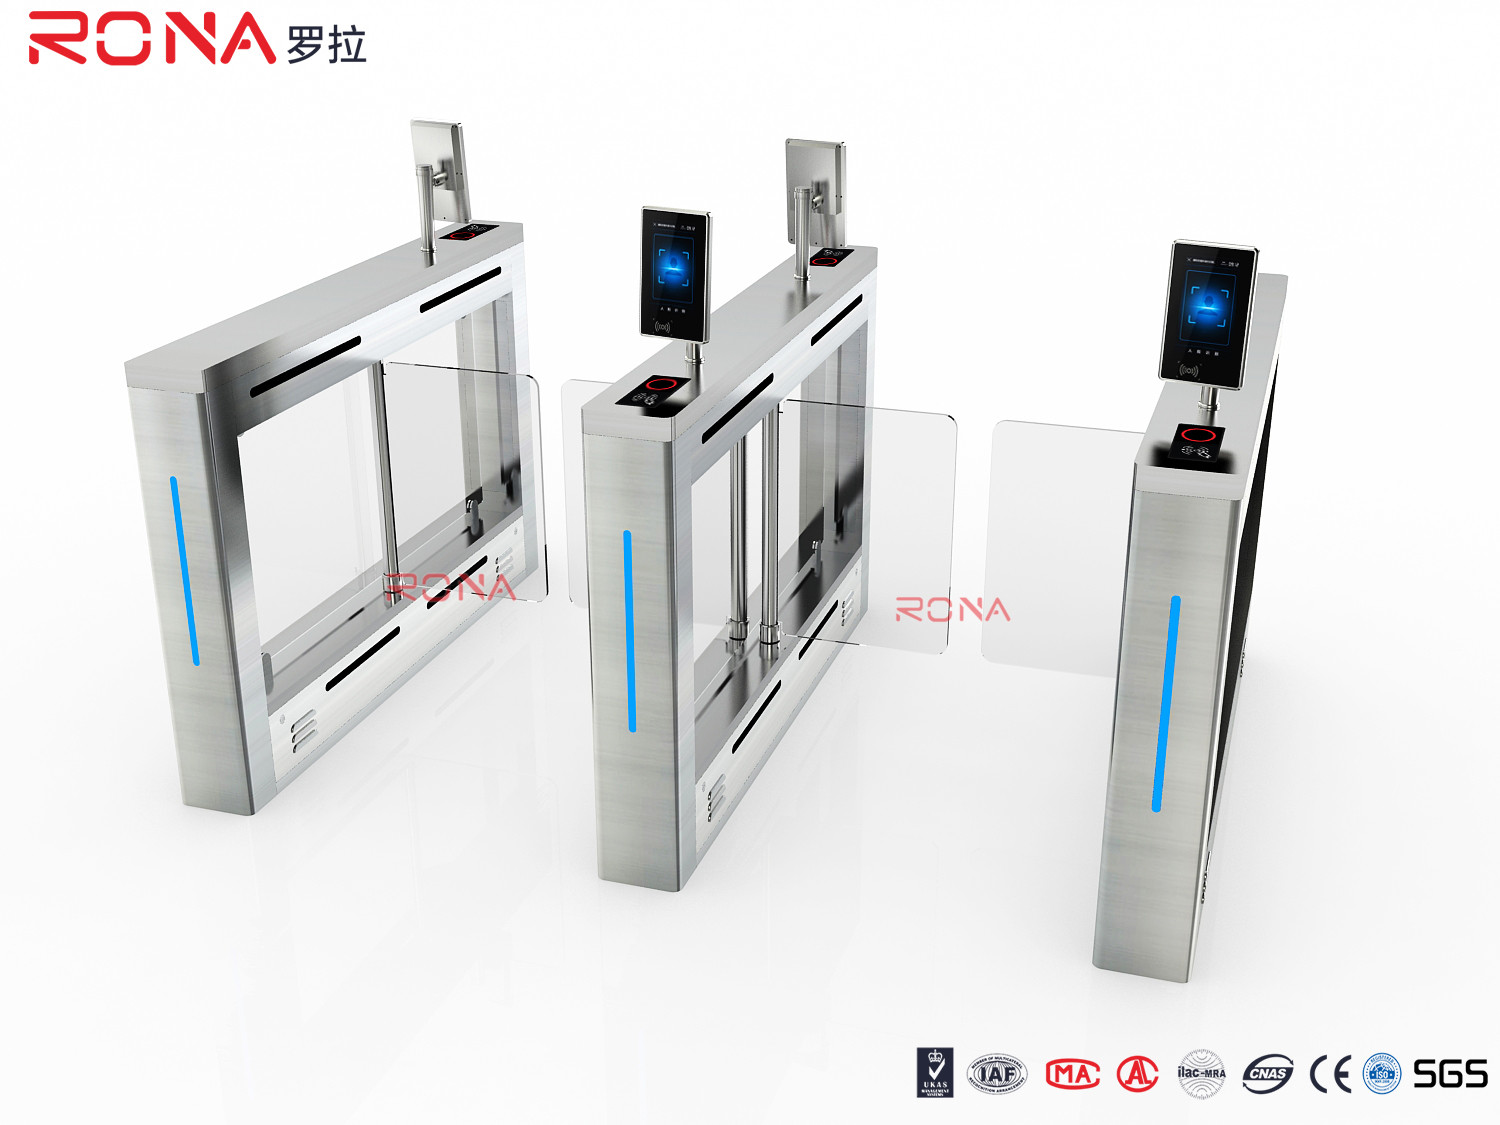  Rfid Automatic Acrylic Arm Swing Barrier Gate Turnstile 550-1100mm Passage Width Manufactures